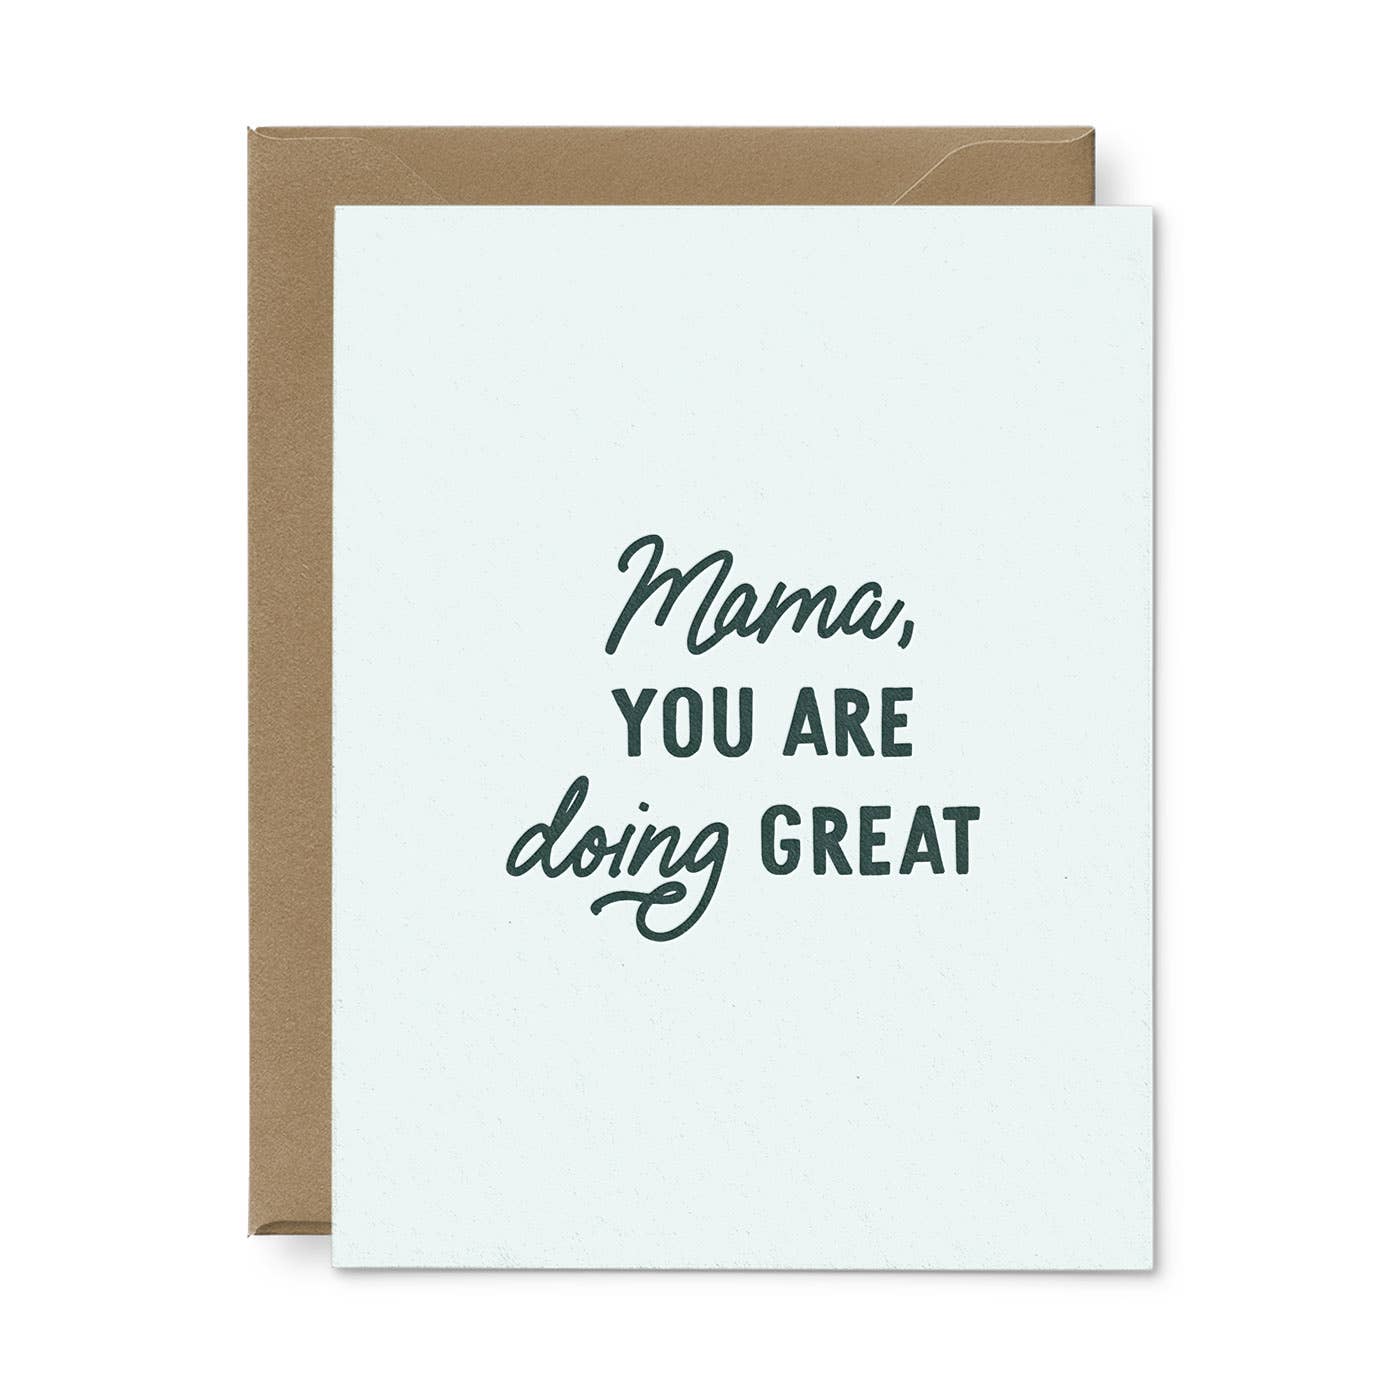 Ruff House Print Shop - Mama Doing Great Mother's Day Greeting Card